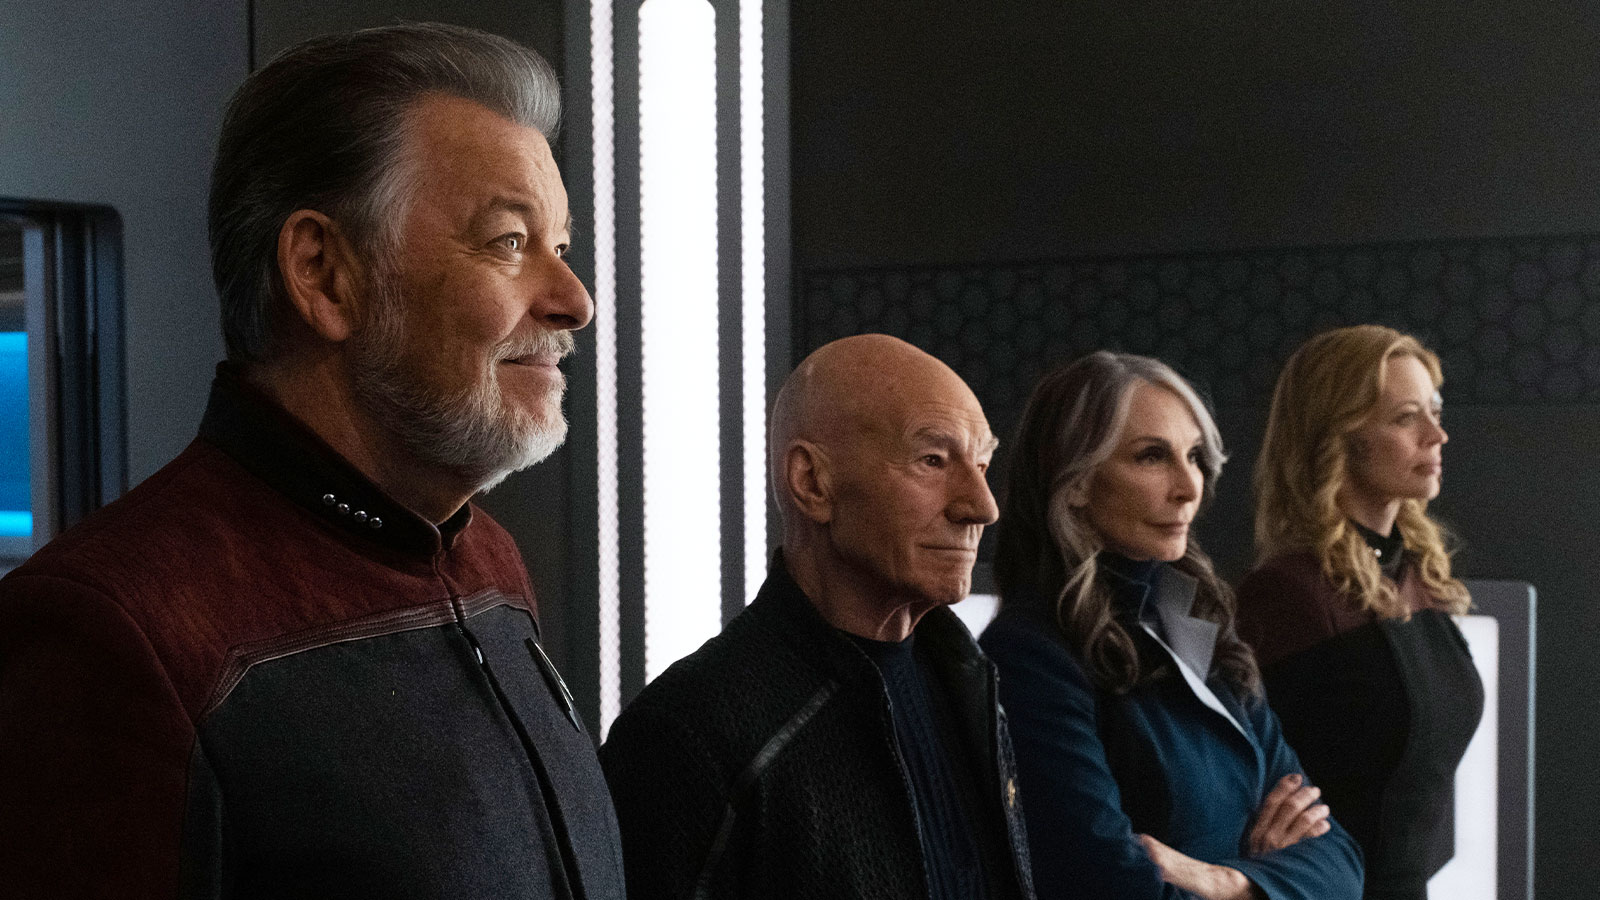 Star Trek: Picard Season 3 Episode 6 "The Bounty" Review: All the pieces are now in place